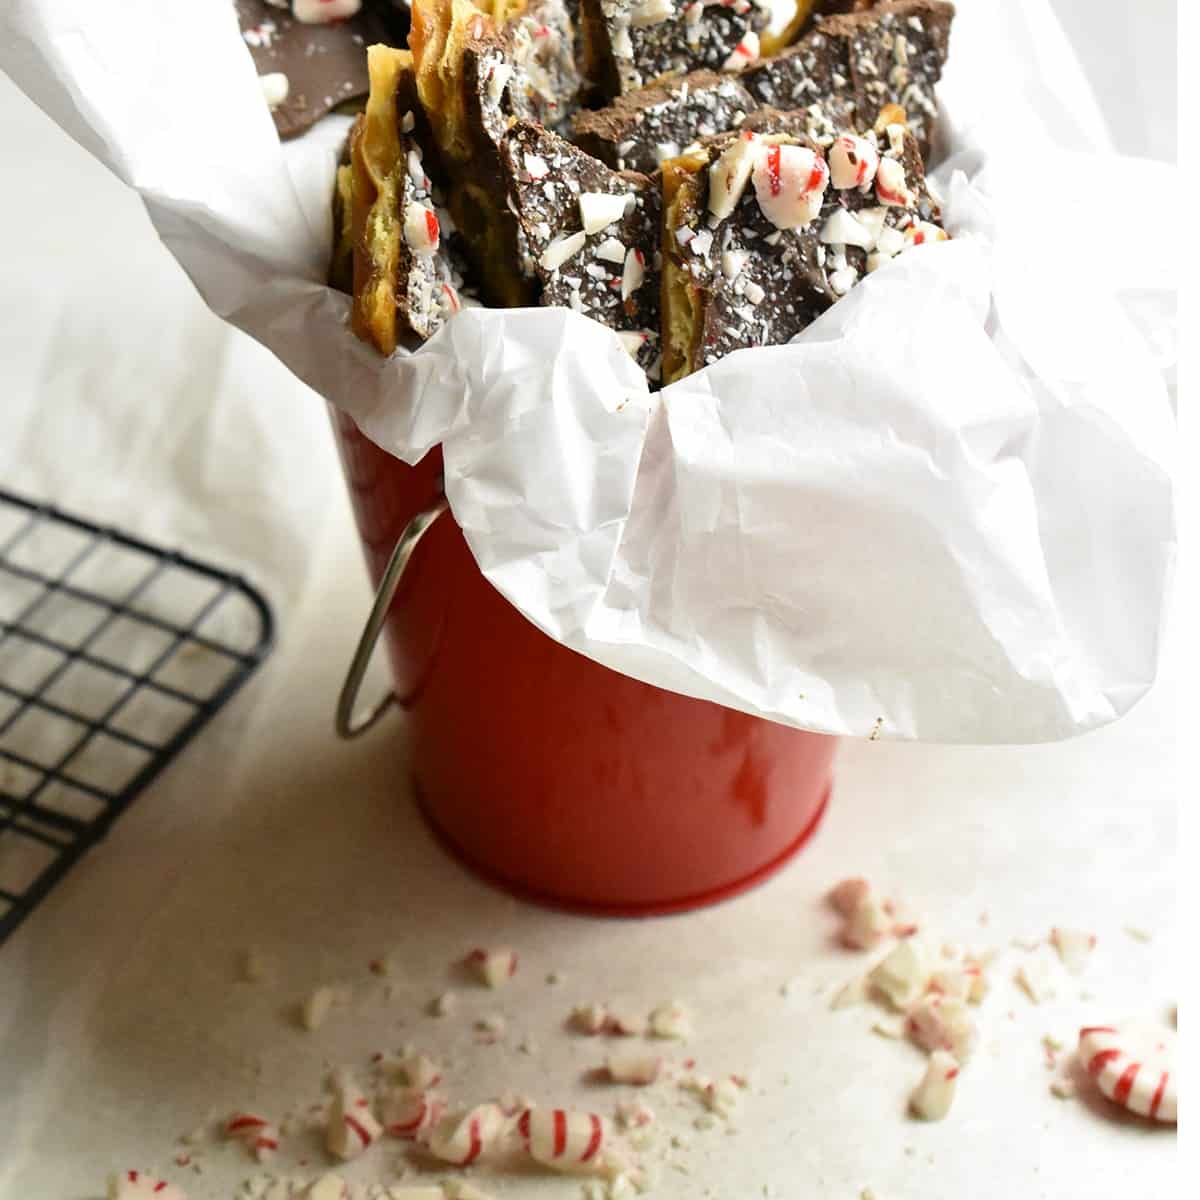 White countertop with a dark metal cooling rack with crack candy resting on a red napkin, crushed peppermint scarred on the counter and a red tin pail lined with white tissue full of the crack candy.